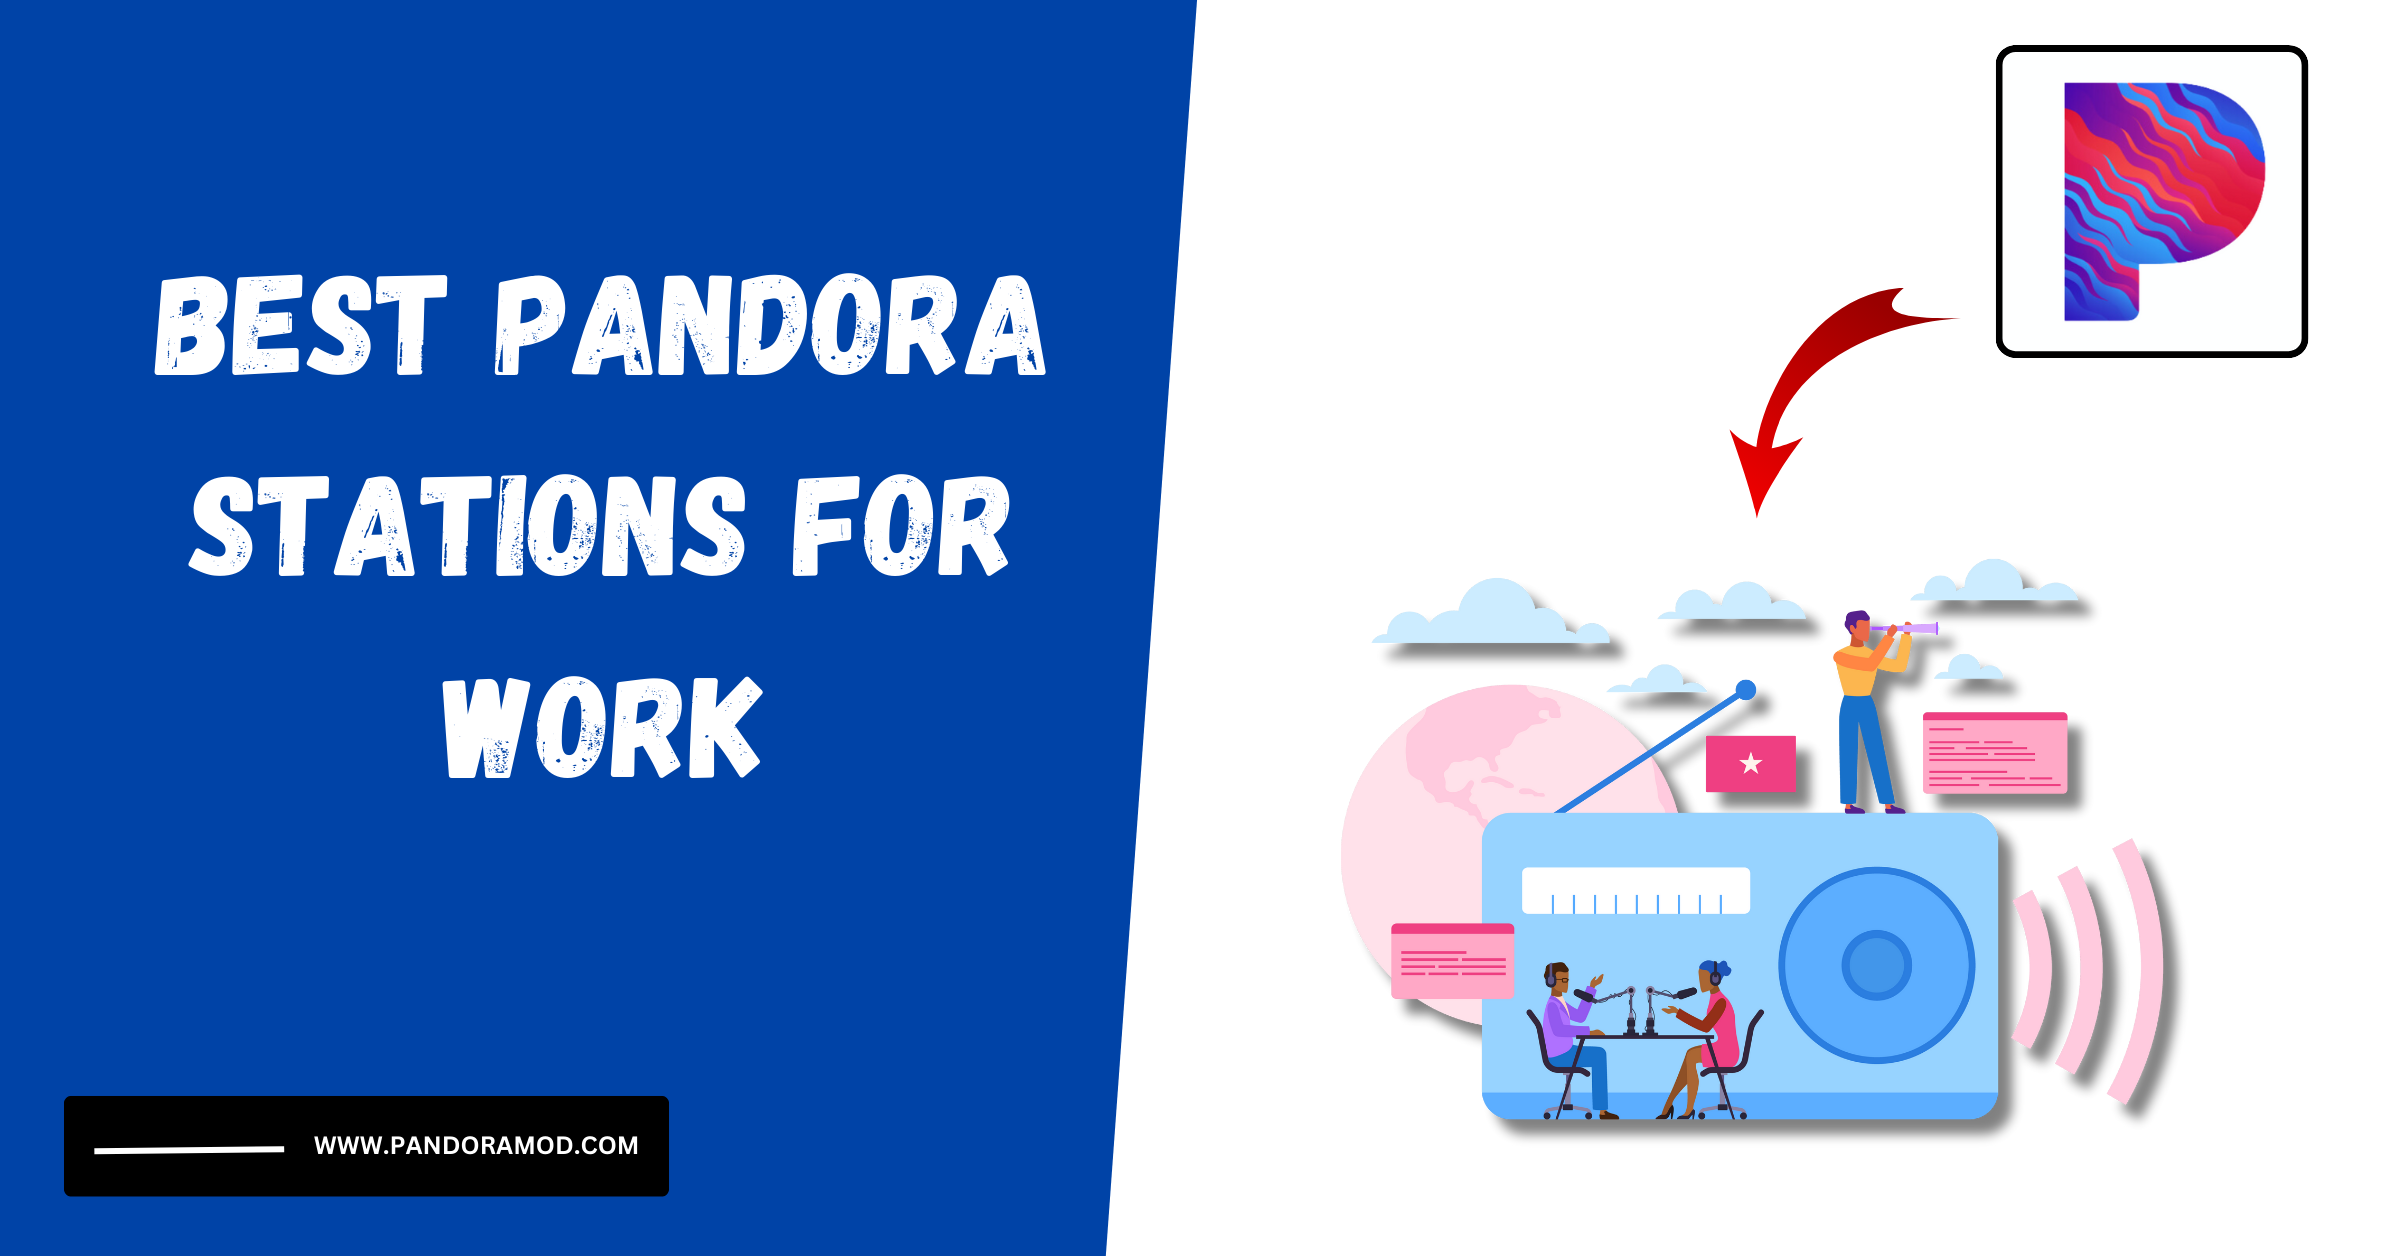 Best Pandora Stations for Work